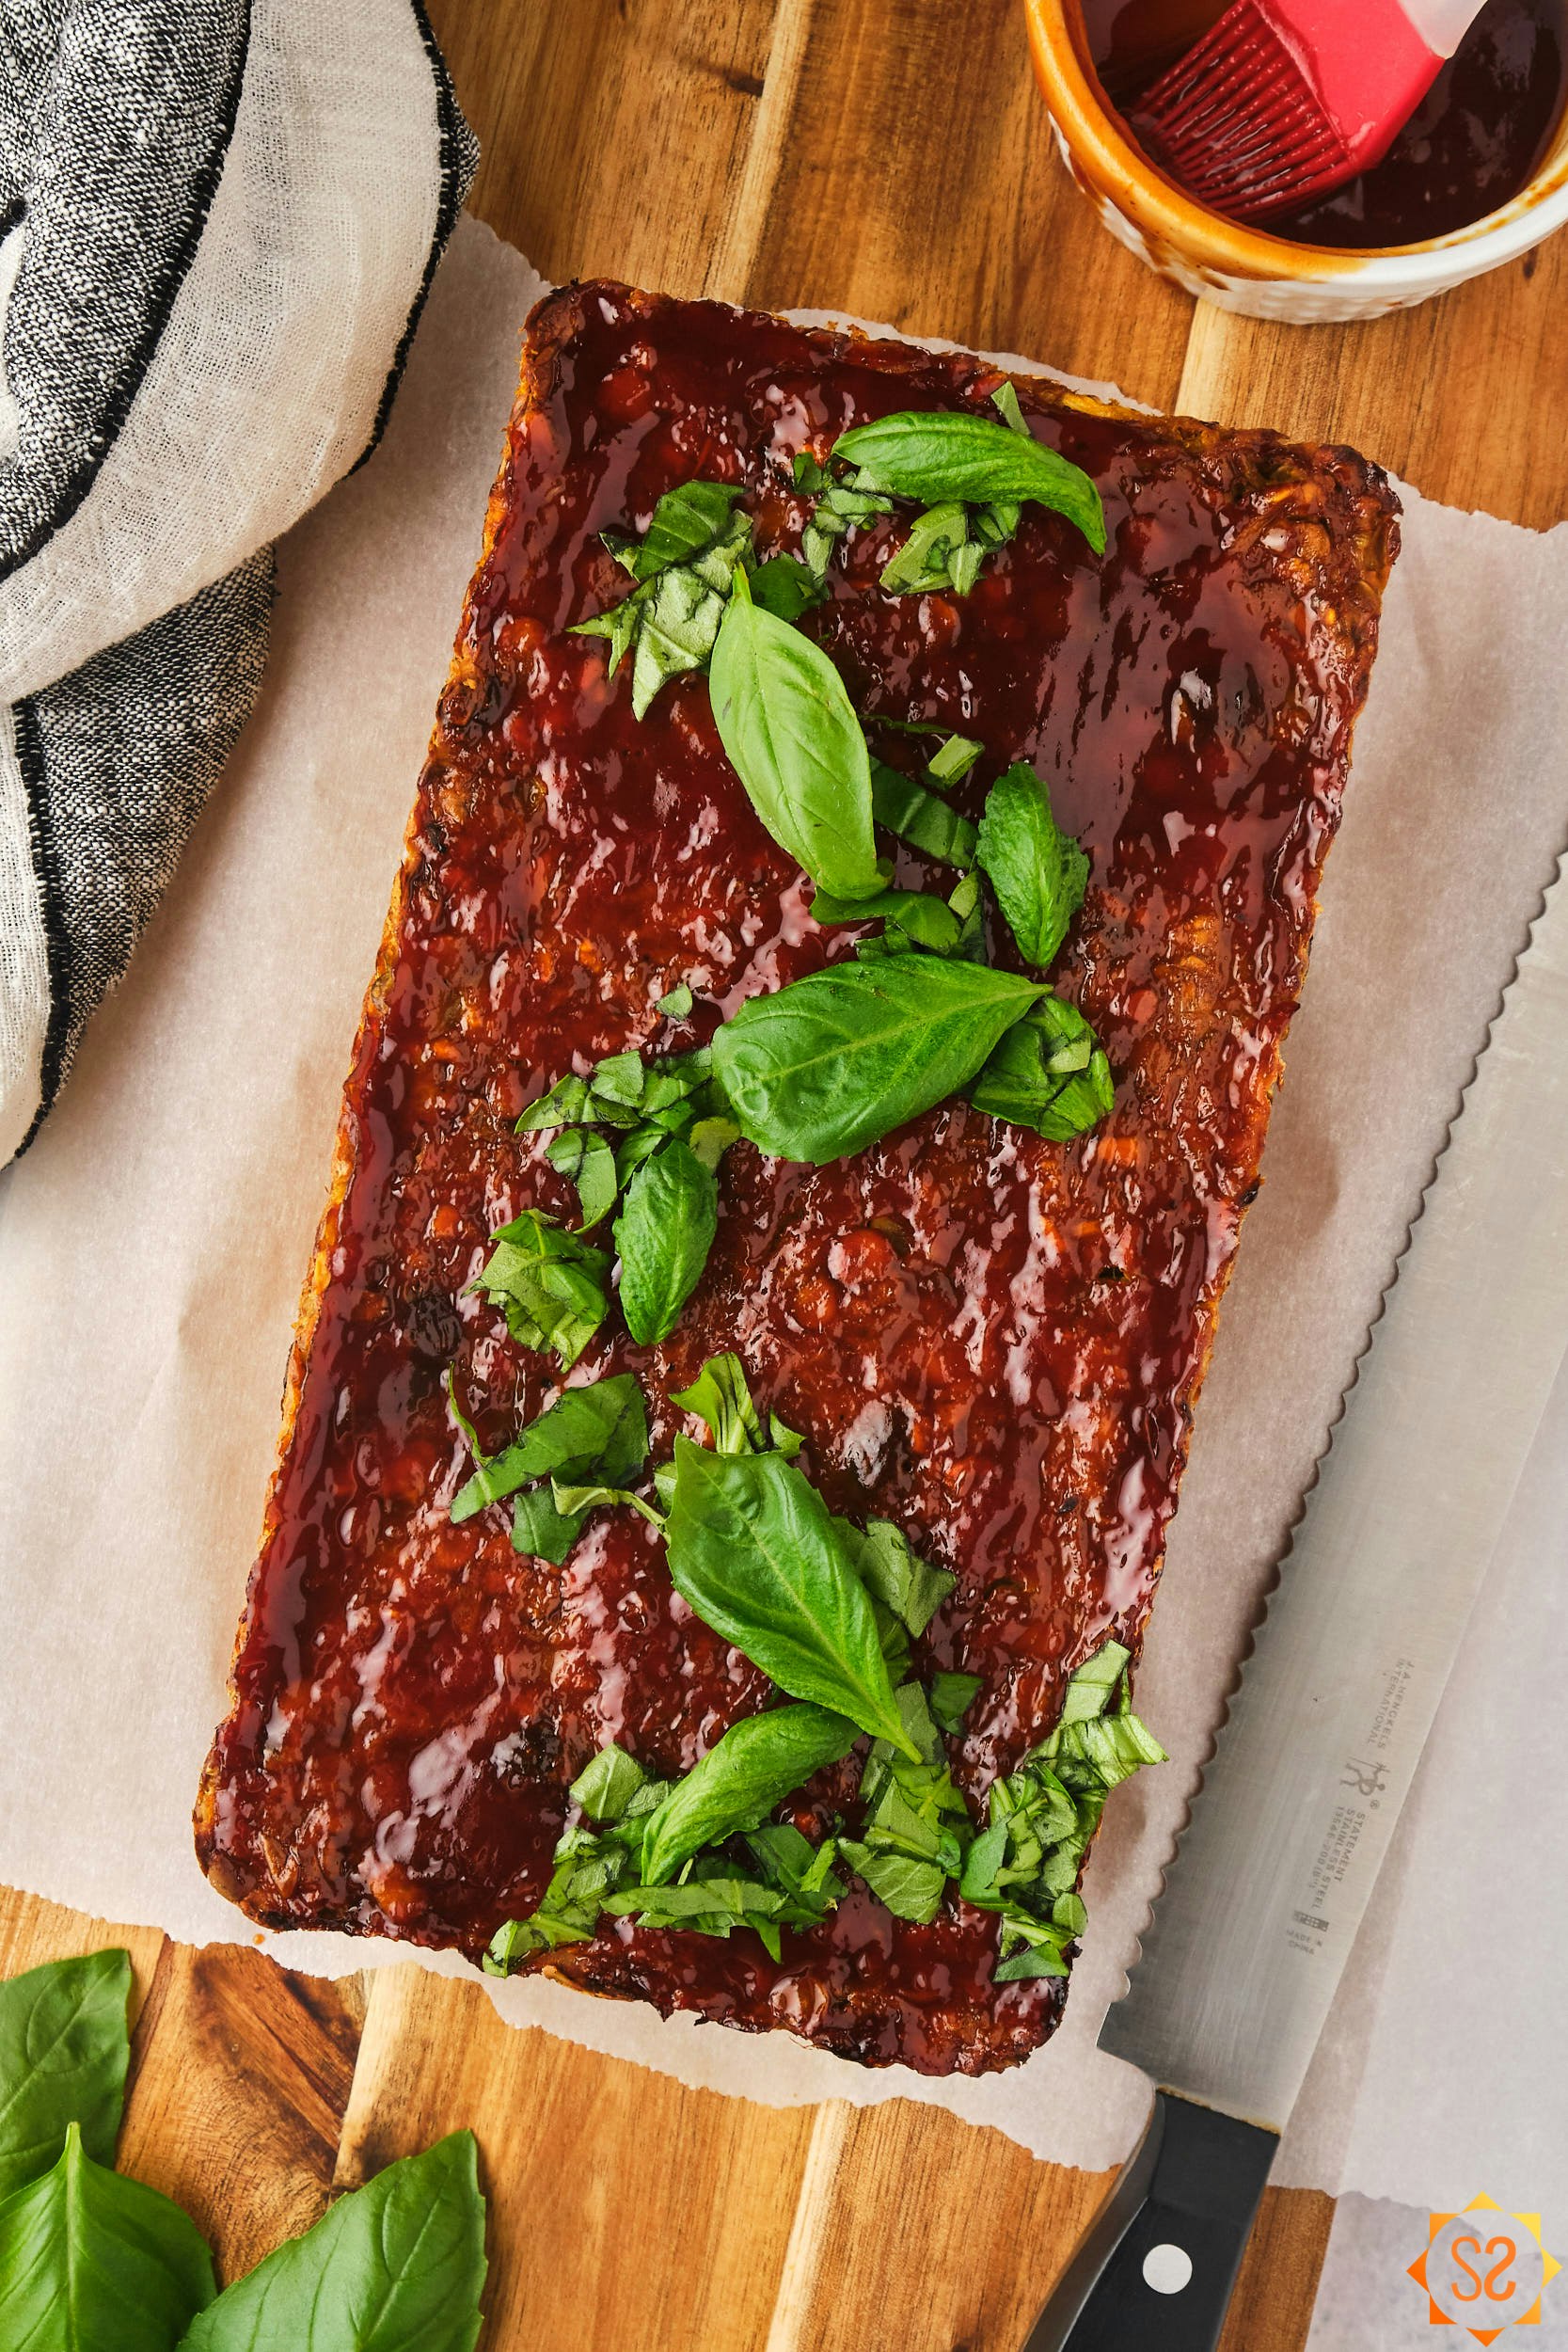 Lentil loaf on a cutting board with a knife, basil, and glaze.